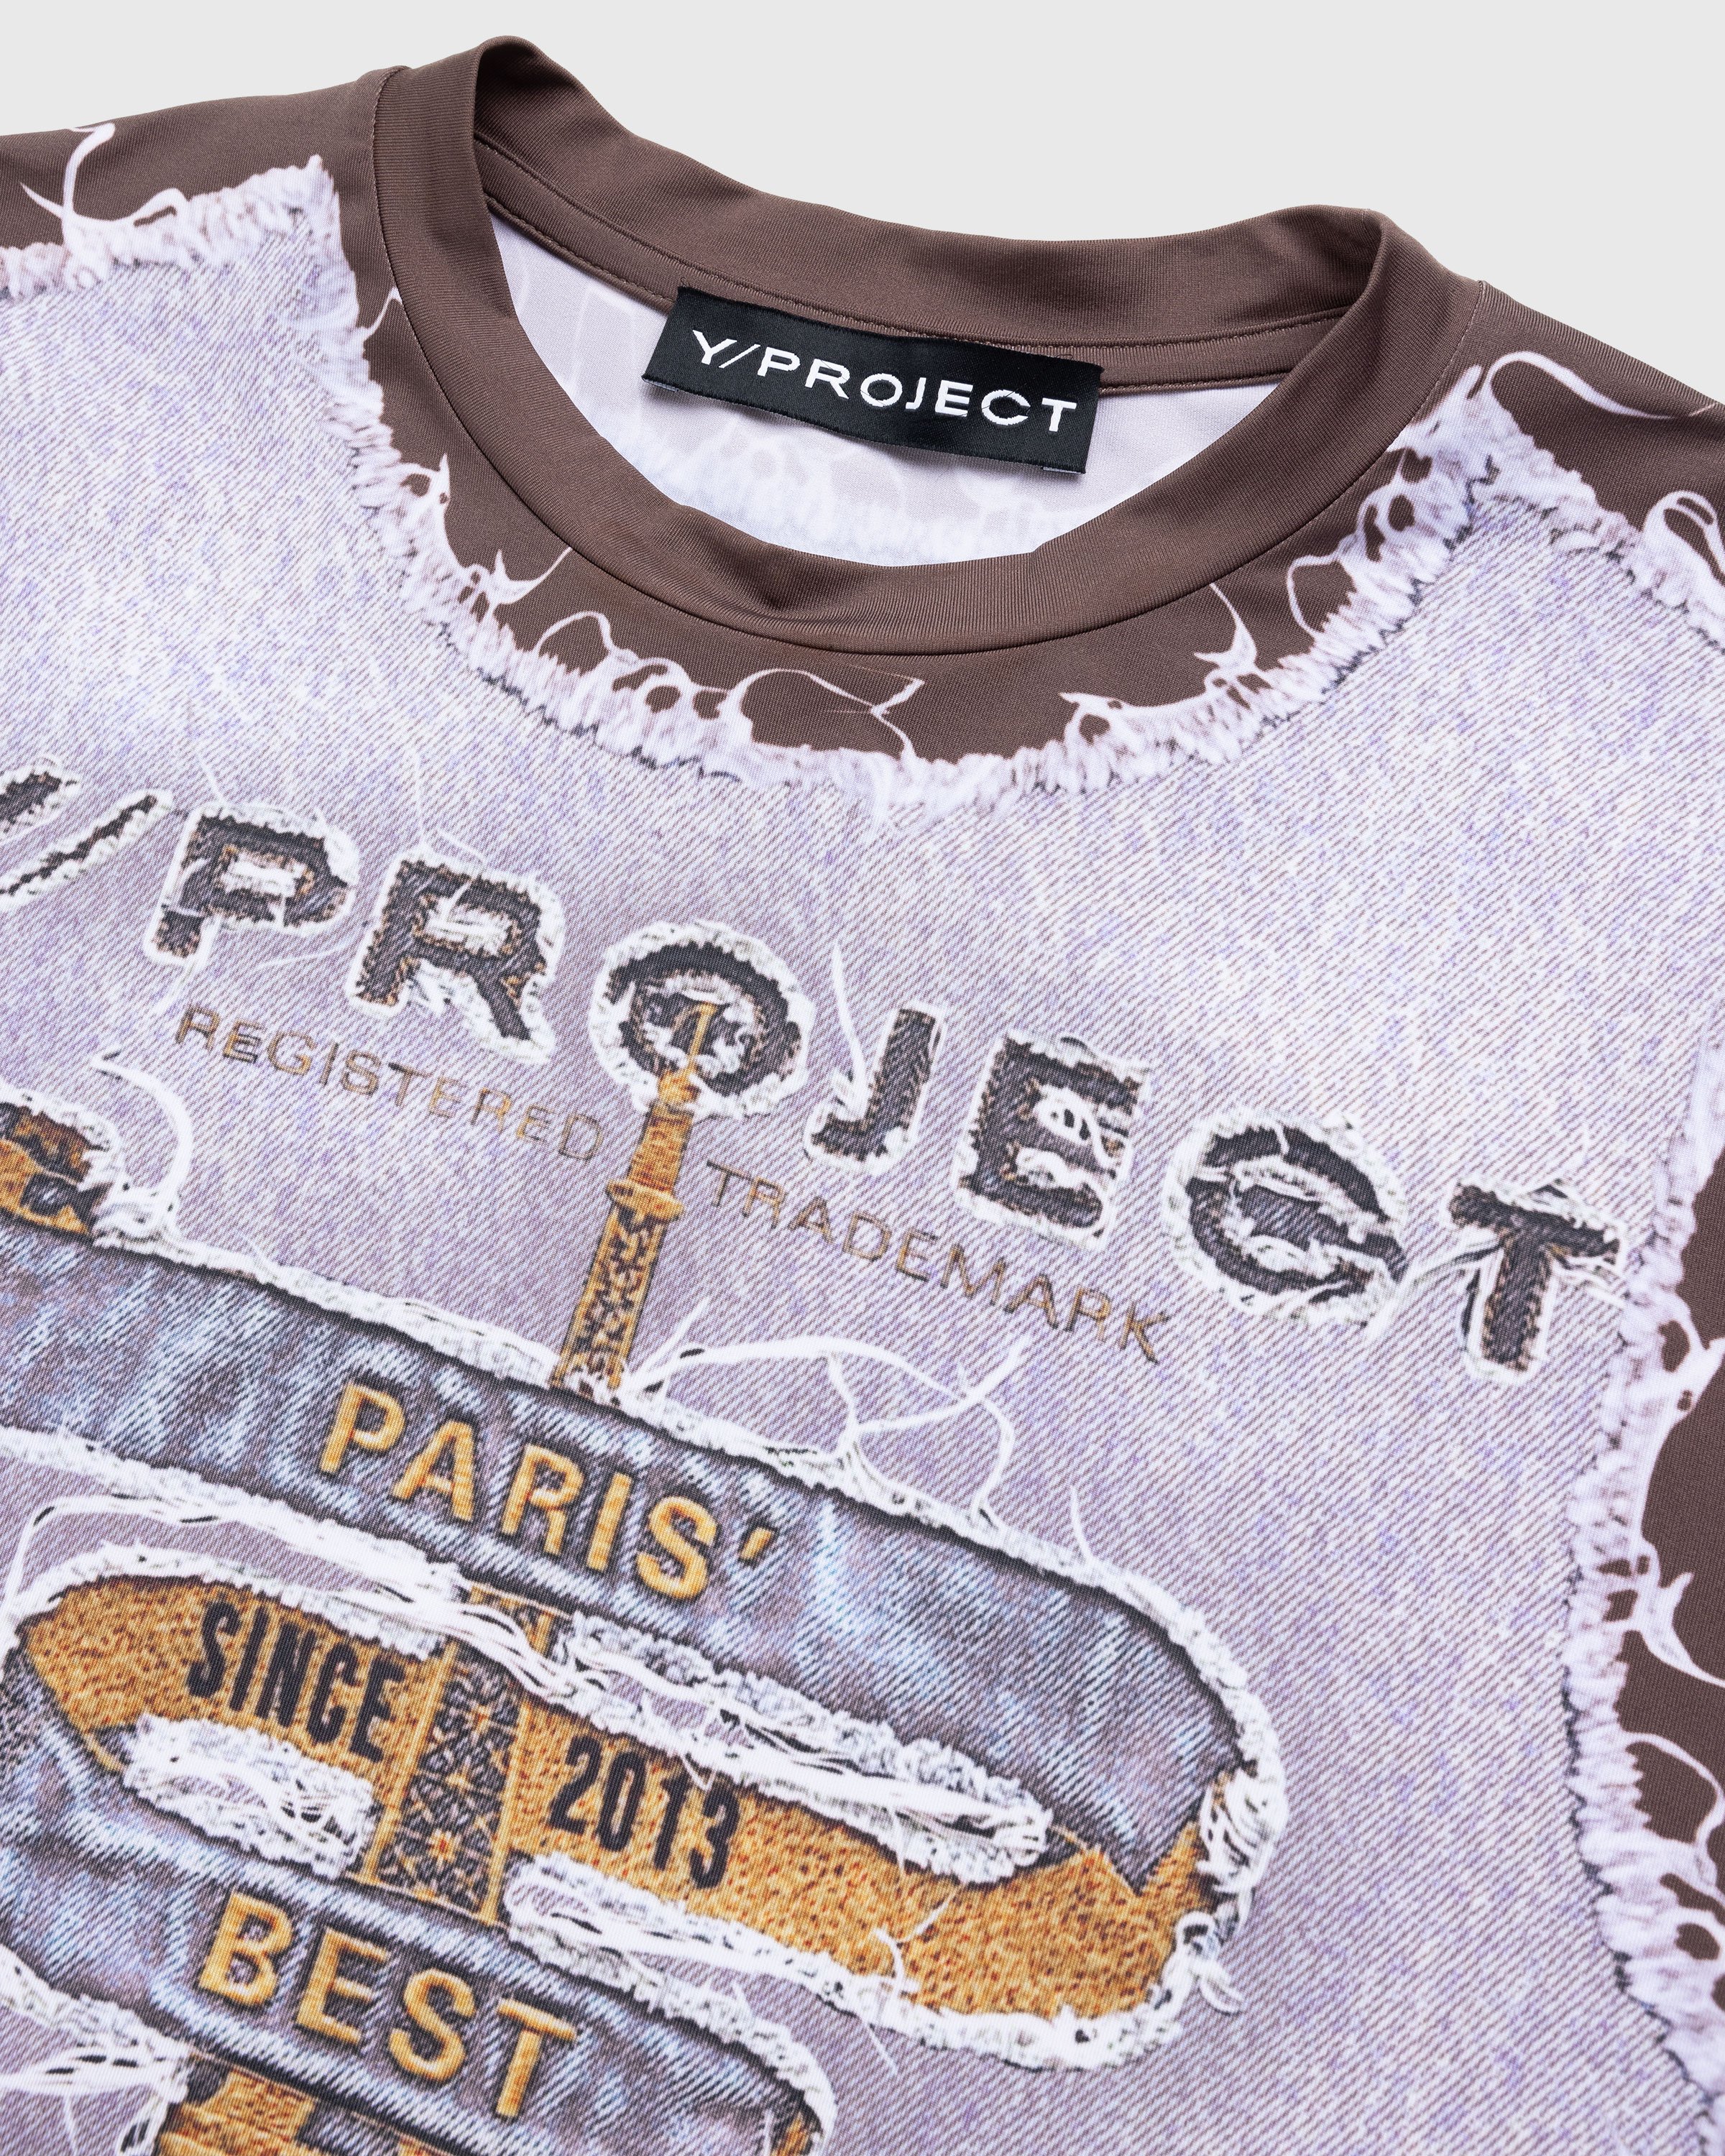 Y/Project - Paris' Best Second Skin T-Shirt Brown/Ice Blue - Clothing - Brown - Image 4